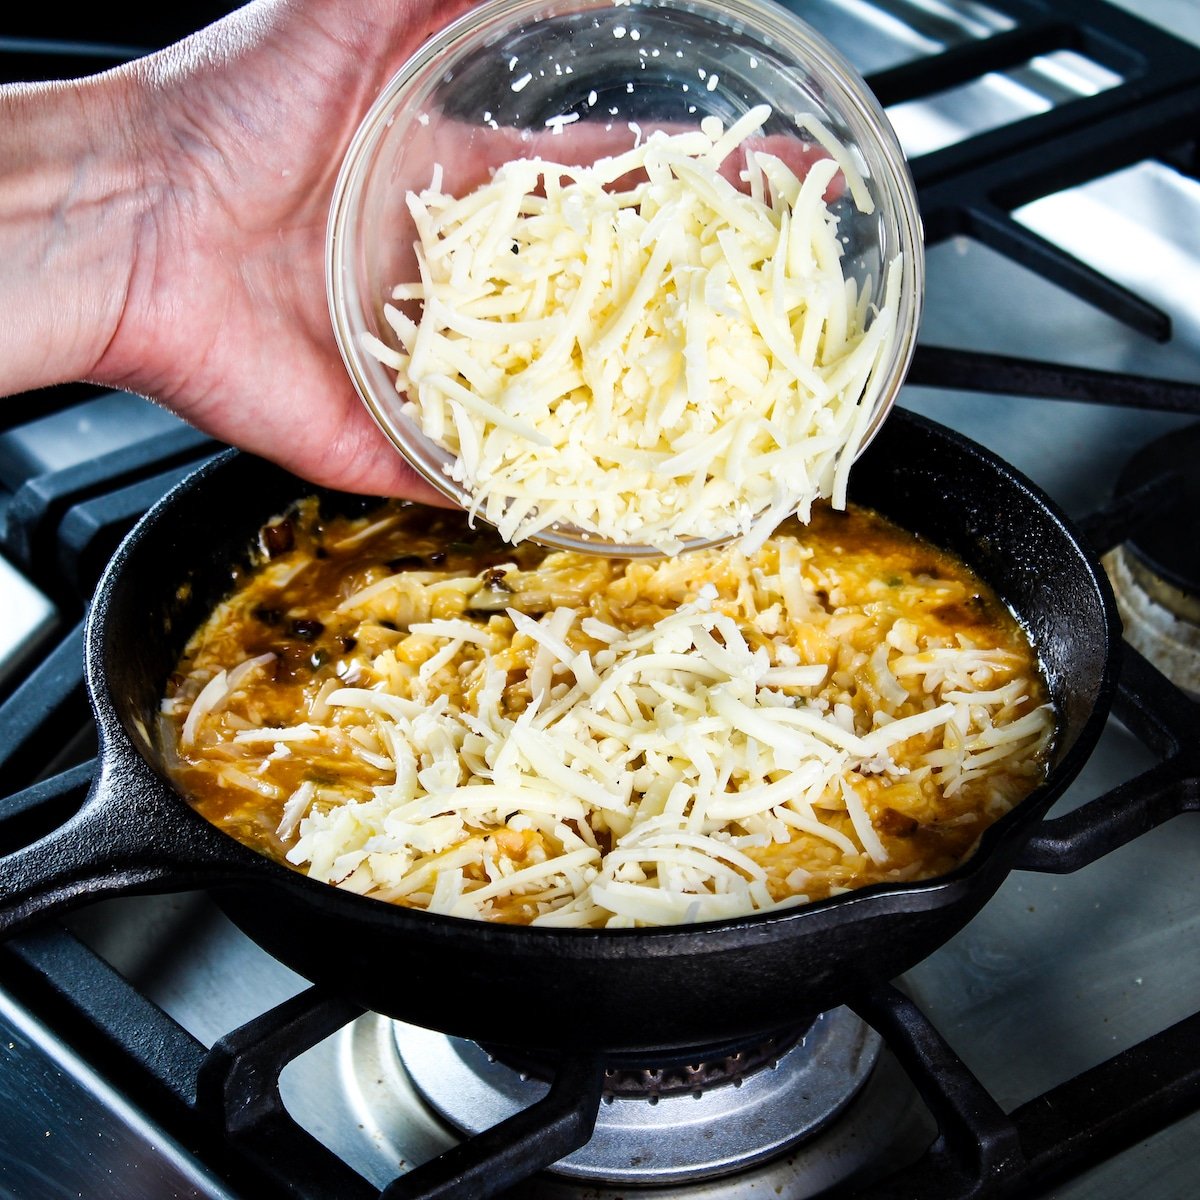 Adding shredded cheddar cheese to the pan of ingredients.